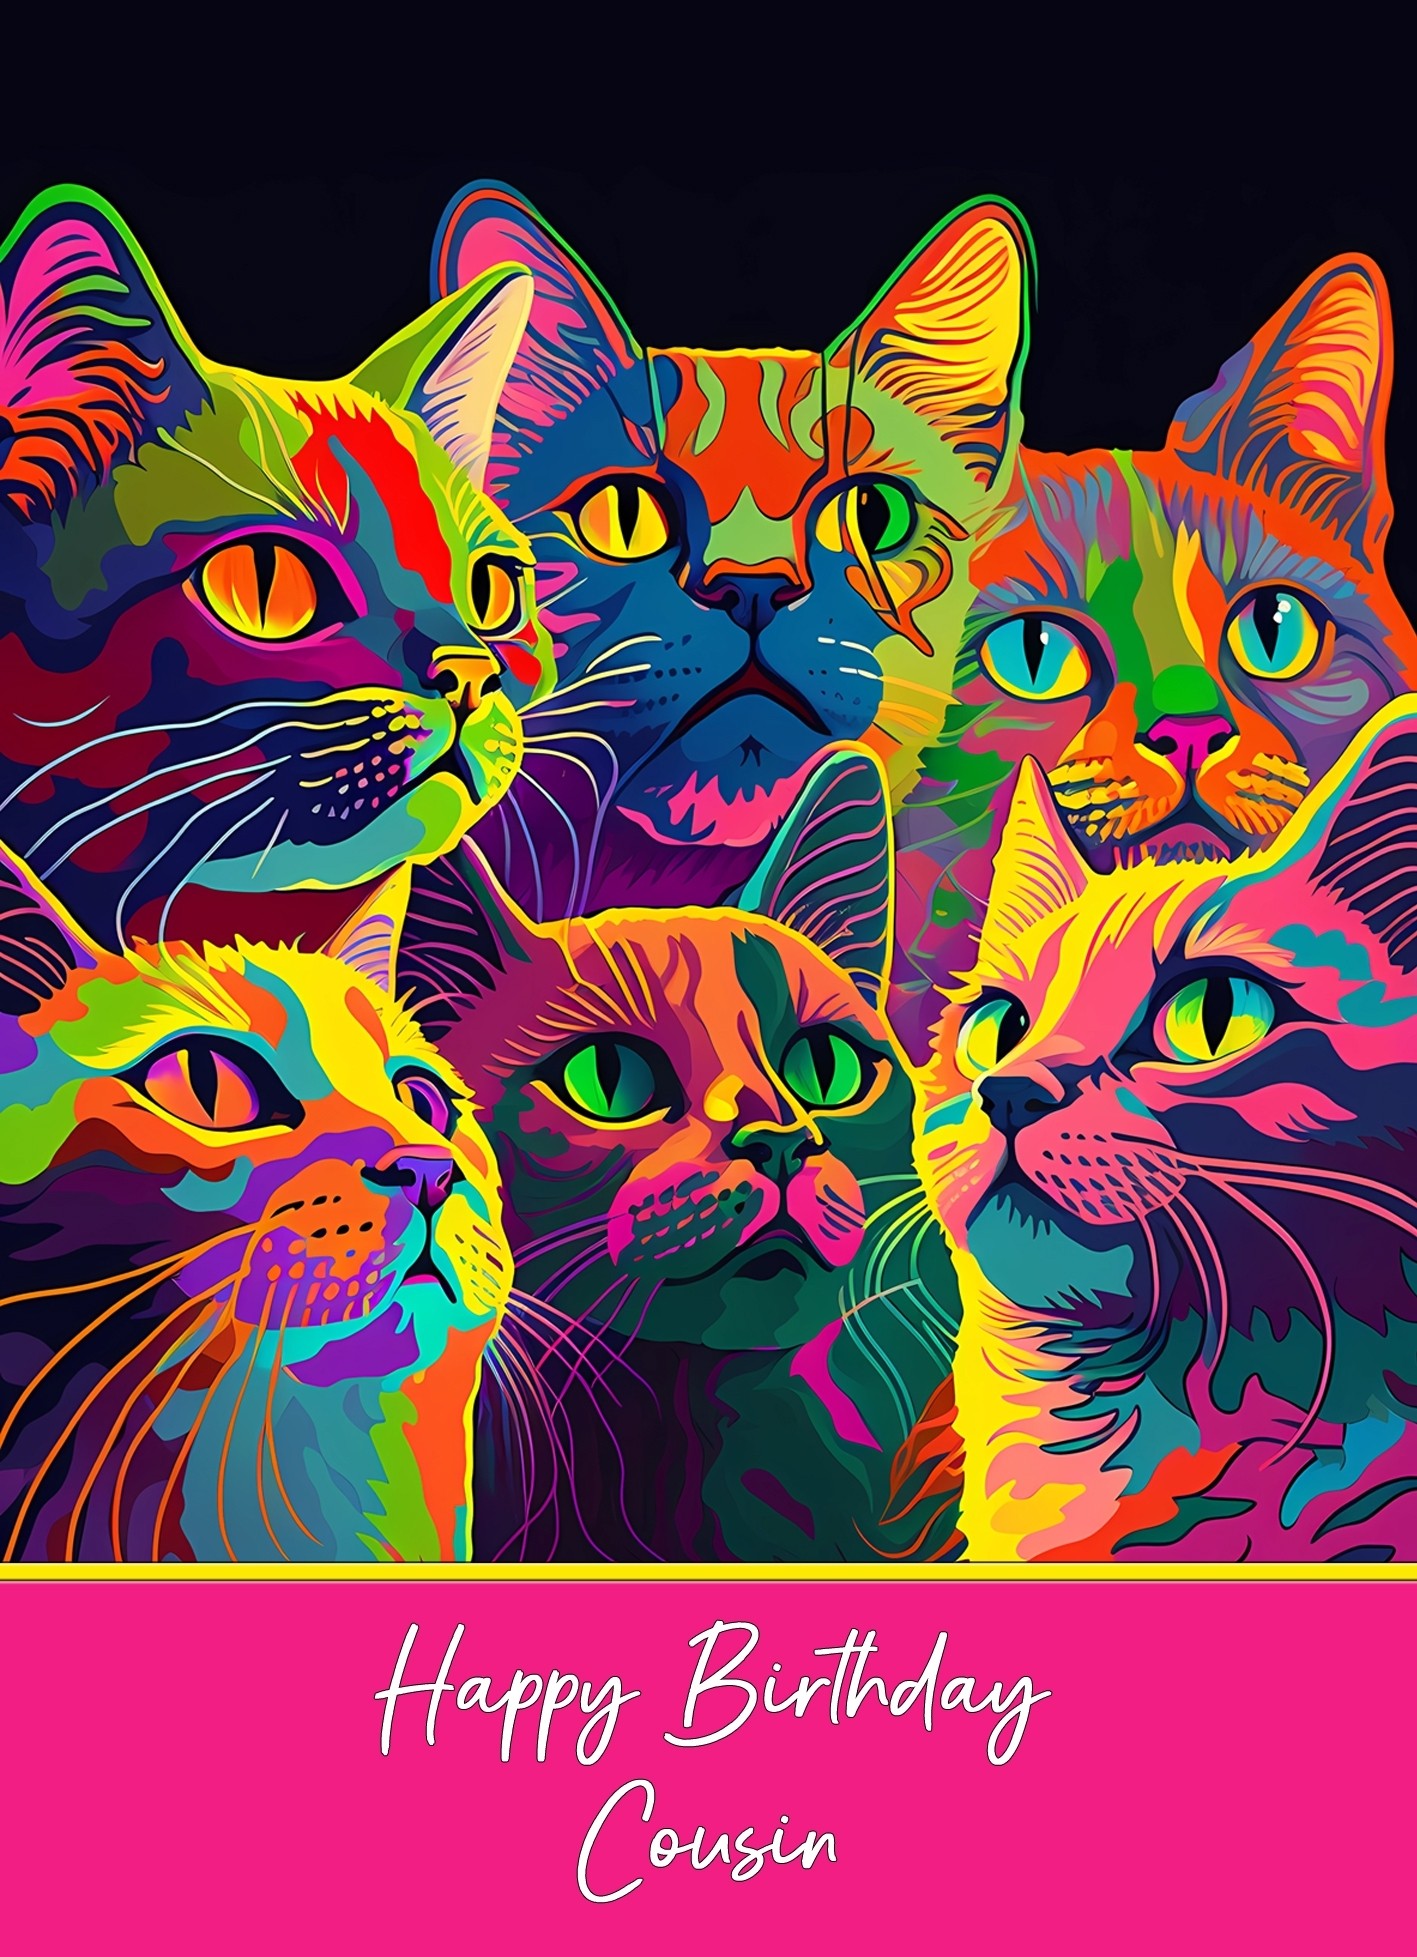 Birthday Card For Cousin (Colourful Cat Art)